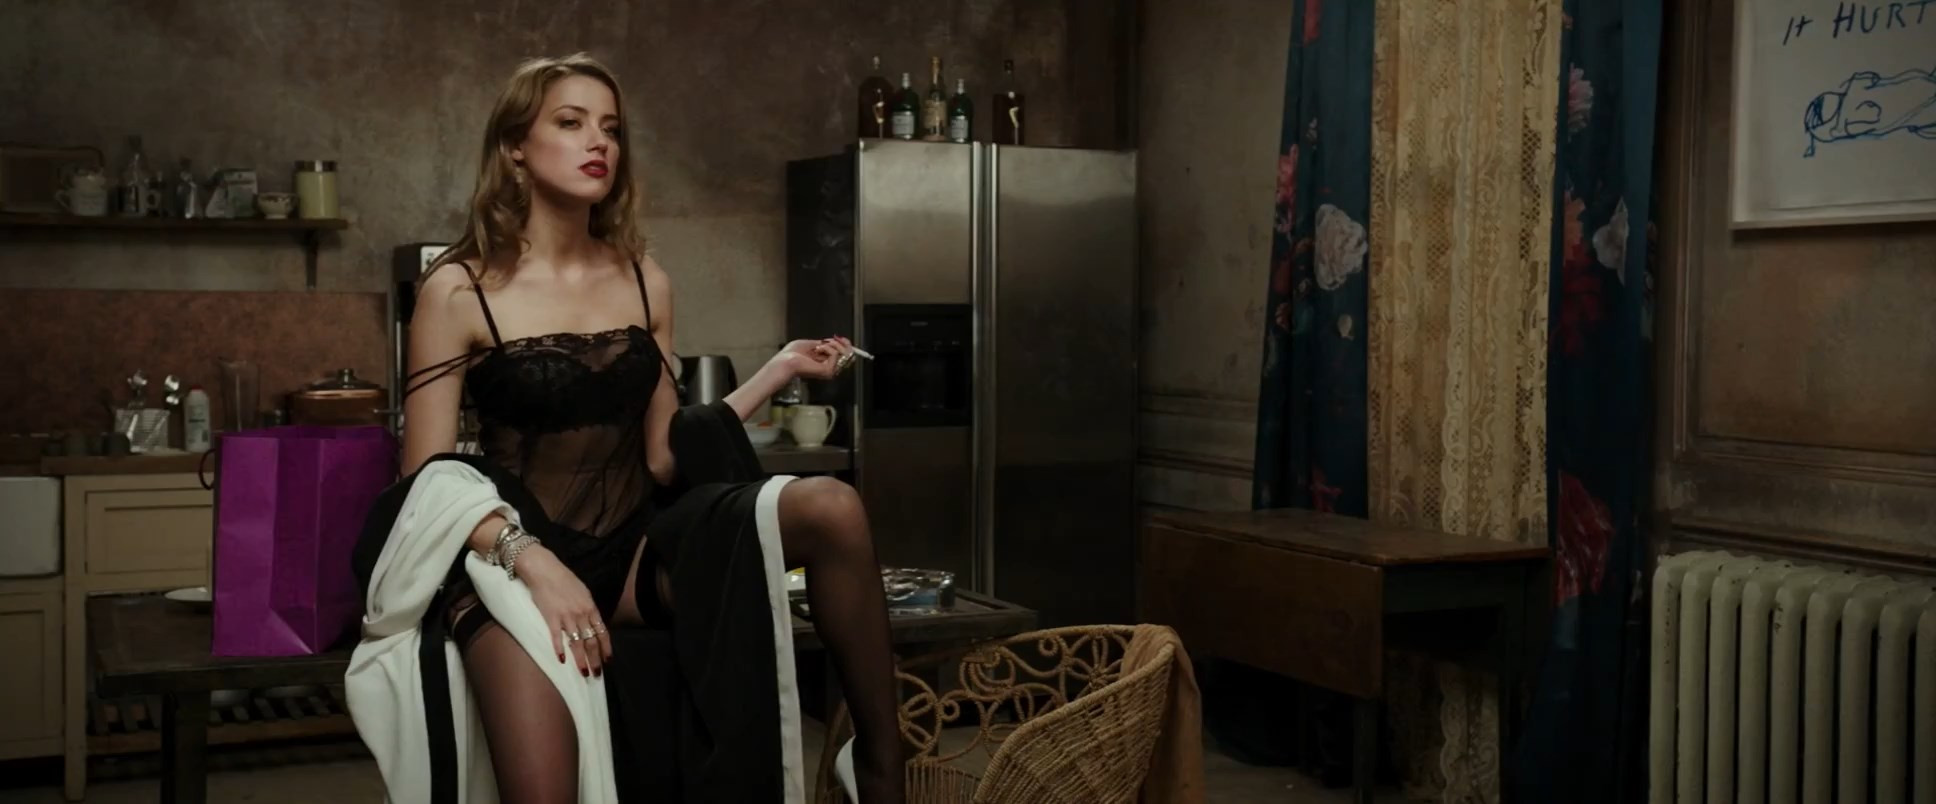 Amber Heard Nude and Sexy TheFappening.nu 298e9aa651bf58541f.jpg